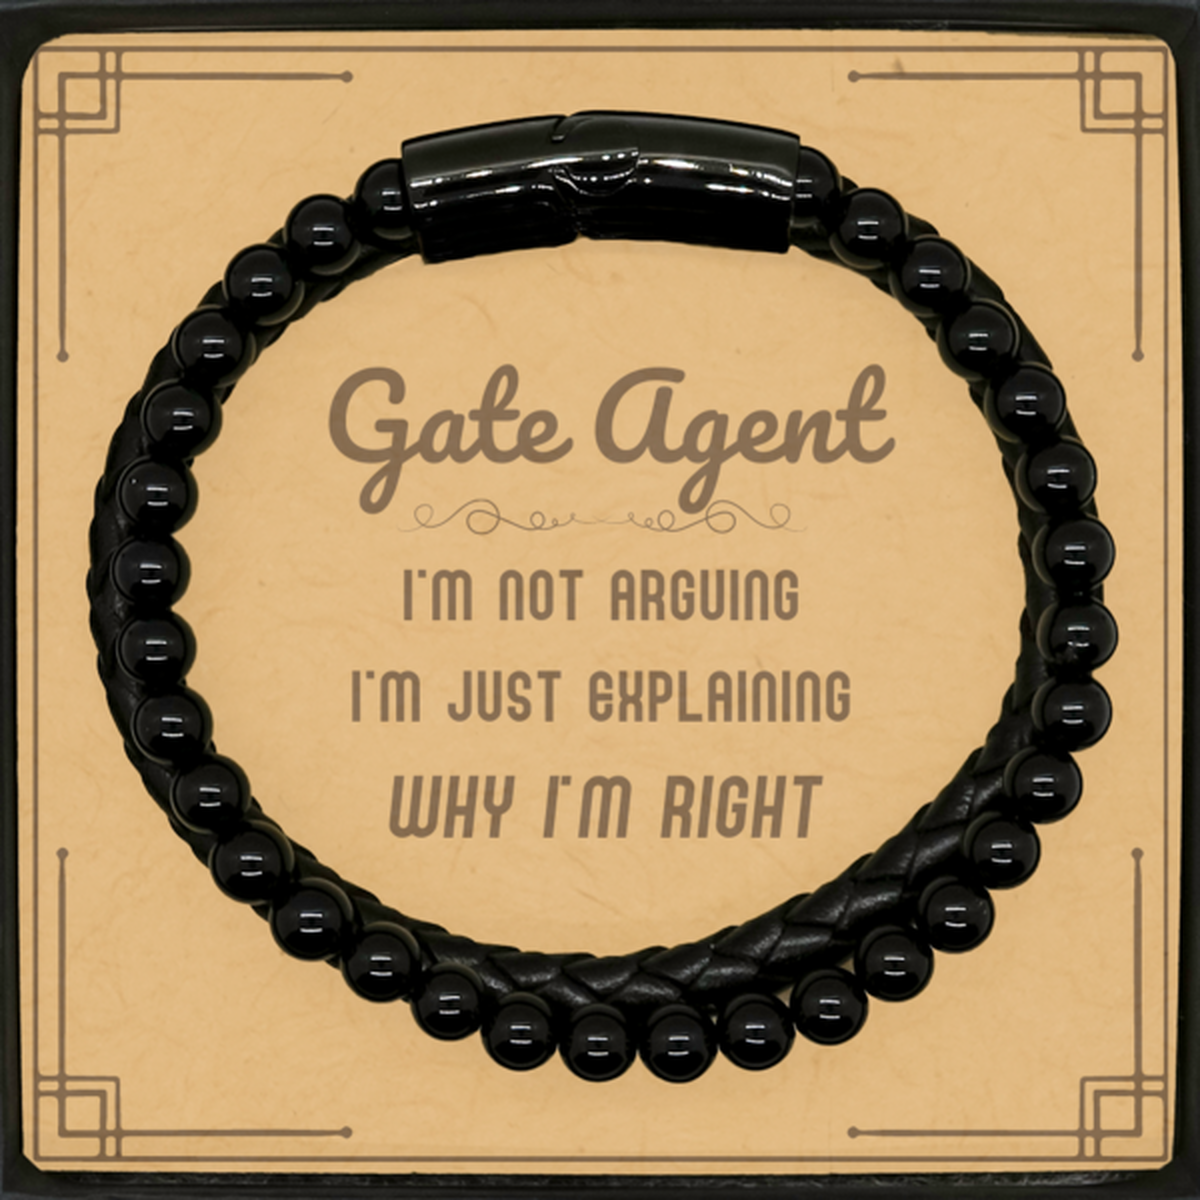 Gate Agent I'm not Arguing. I'm Just Explaining Why I'm RIGHT Stone Leather Bracelets, Funny Saying Quote Gate Agent Gifts For Gate Agent Message Card Graduation Birthday Christmas Gifts for Men Women Coworker